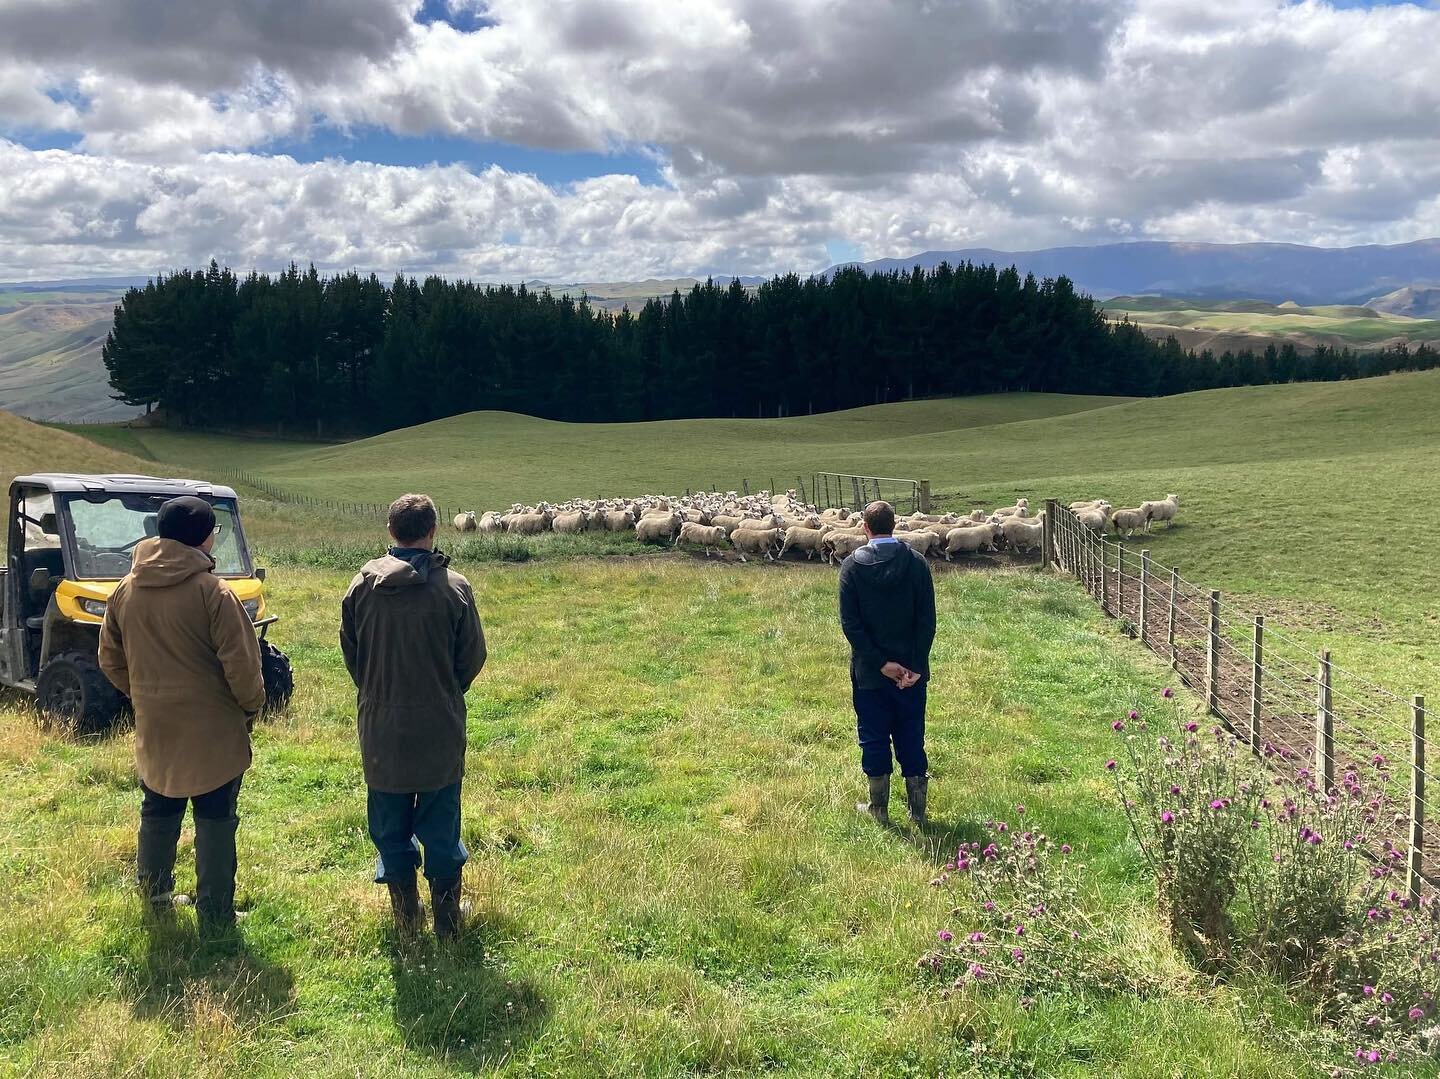 Kellys and Black Hill - a good opportunity to get the Managers together to have a look around the farm

#plimmerandcofarms #motukawa #blackhill #kellys #northview #farming #nzfarming #newzealand